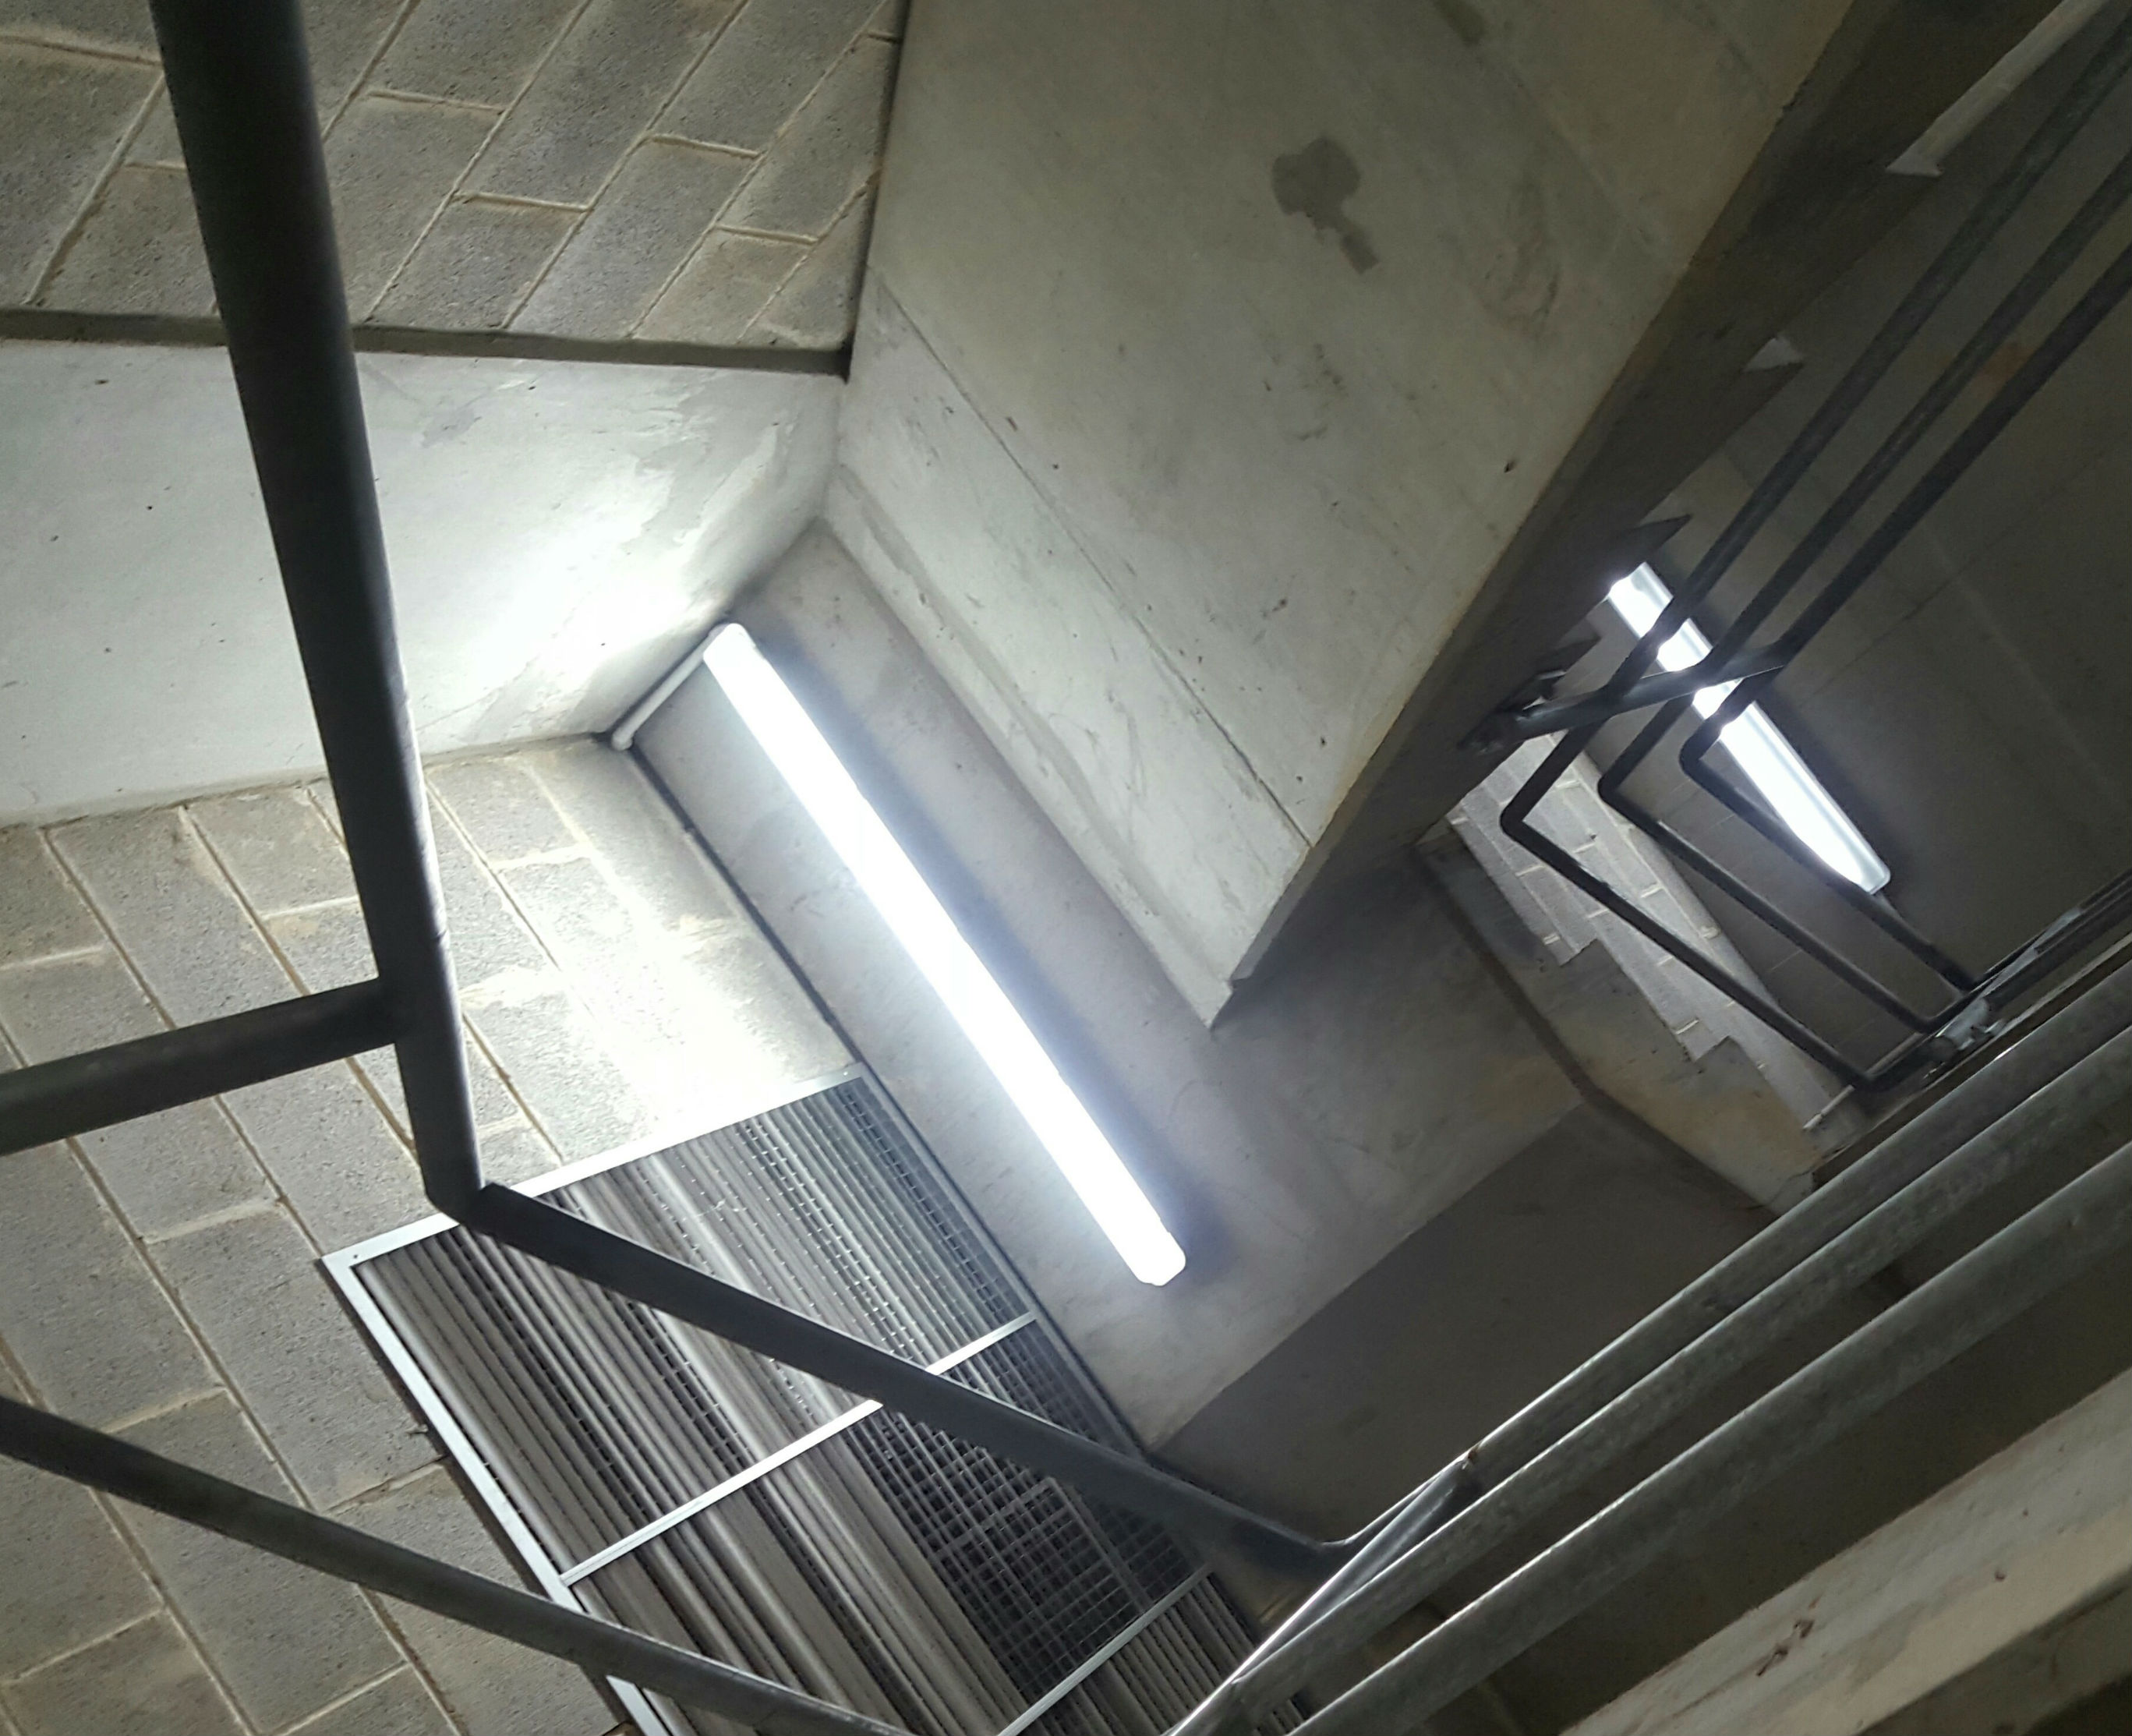 LED lighting in fire stairs of undercover carpark